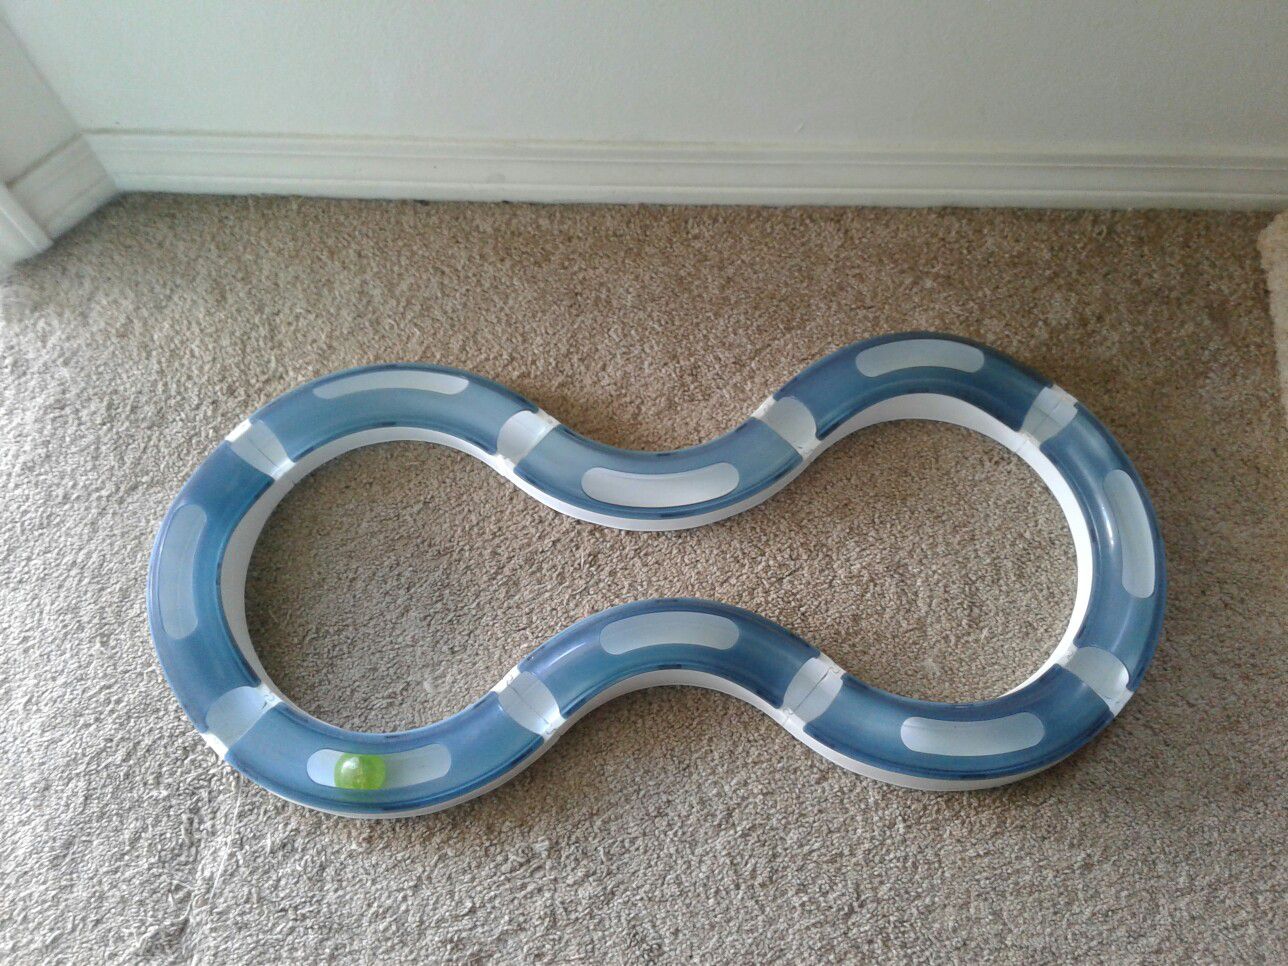 Pet track w/light up ball toy